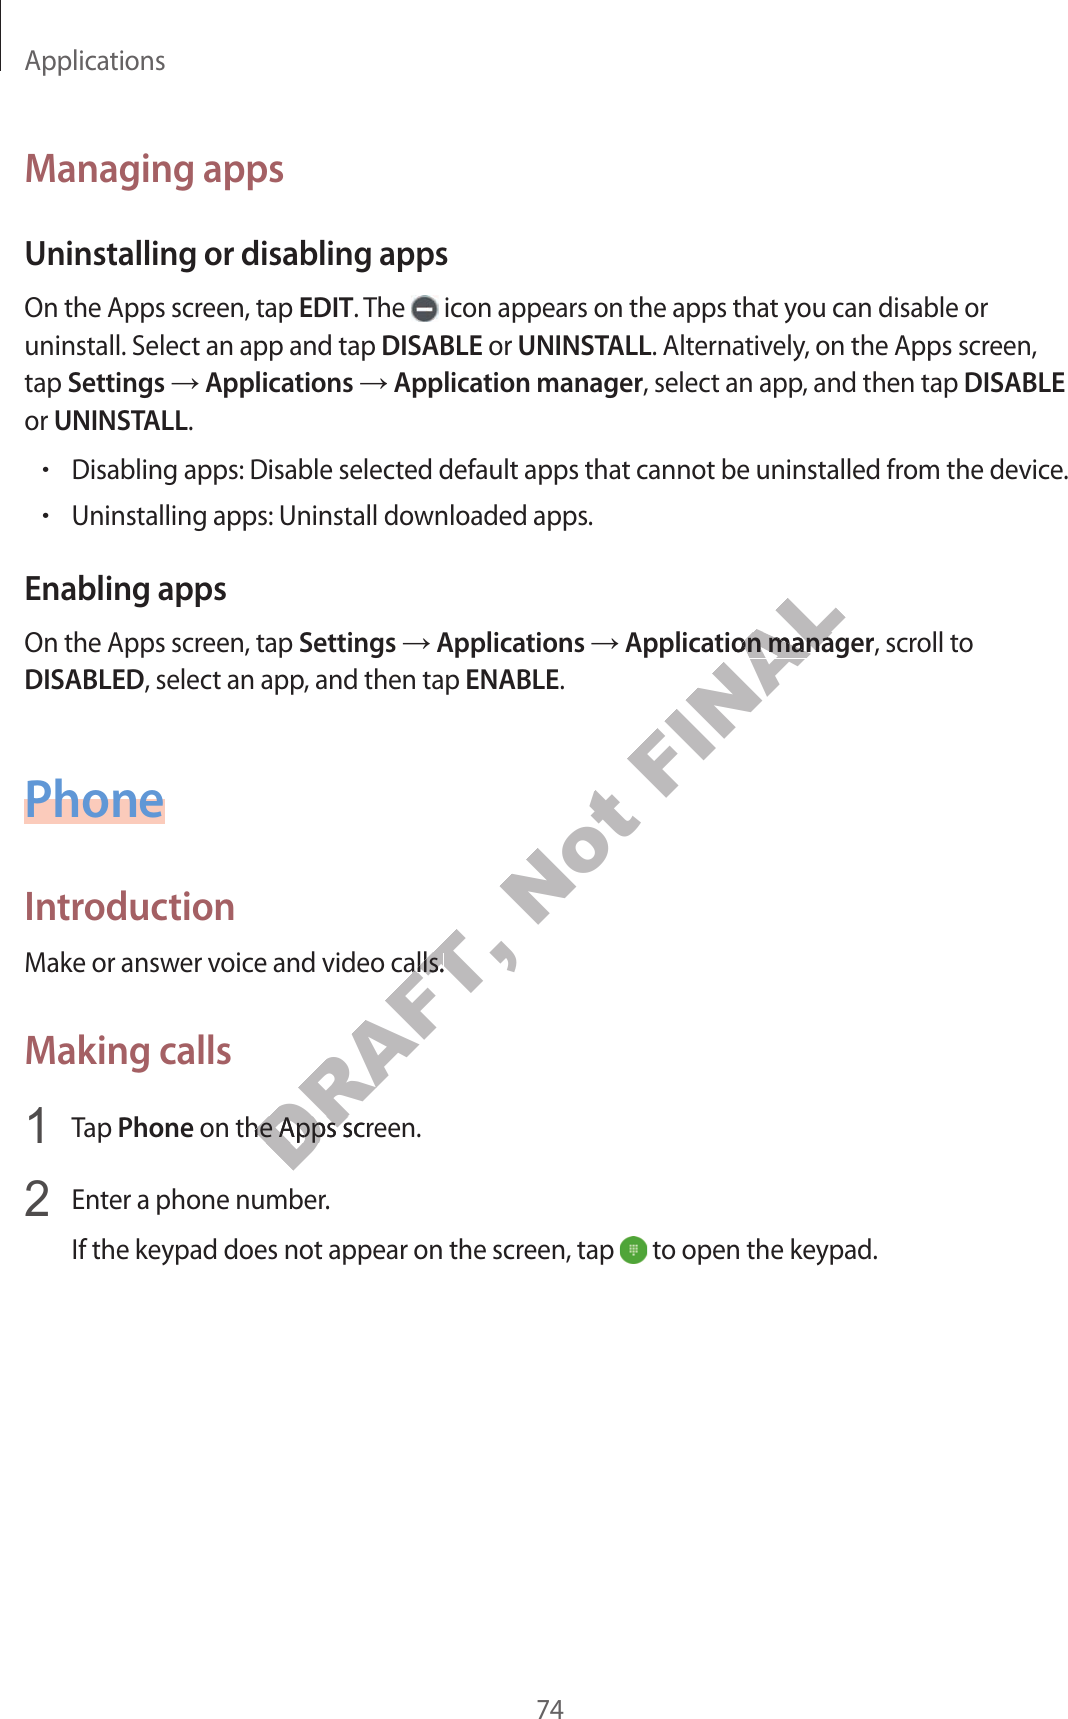 Applications74Managing appsUninstalling or disabling appsOn the Apps screen, tap EDIT. The   icon appears on the apps that you can disable or uninstall. Select an app and tap DISABLE or UNINSTALL. Alternatively, on the Apps screen, tap Settings ĺ Applications ĺ Application manager, select an app, and then tap DISABLE or UNINSTALL.•Disabling apps: Disable selected default apps that cannot be uninstalled from the device.•Uninstalling apps: Uninstall downloaded apps.Enabling appsOn the Apps screen, tap Settings ĺ Applications ĺ Application manager, scroll to DISABLED, select an app, and then tap ENABLE.PhoneIntroductionMake or answer voice and video calls.Making calls1  Tap Phone on the Apps screen.2  Enter a phone number.If the keypad does not appear on the screen, tap   to open the keypad.DRAFT, e and video calls.e and video calls.DRAFT,  on the Apps screen. on the Apps scrNot FINALpplication managertion manager